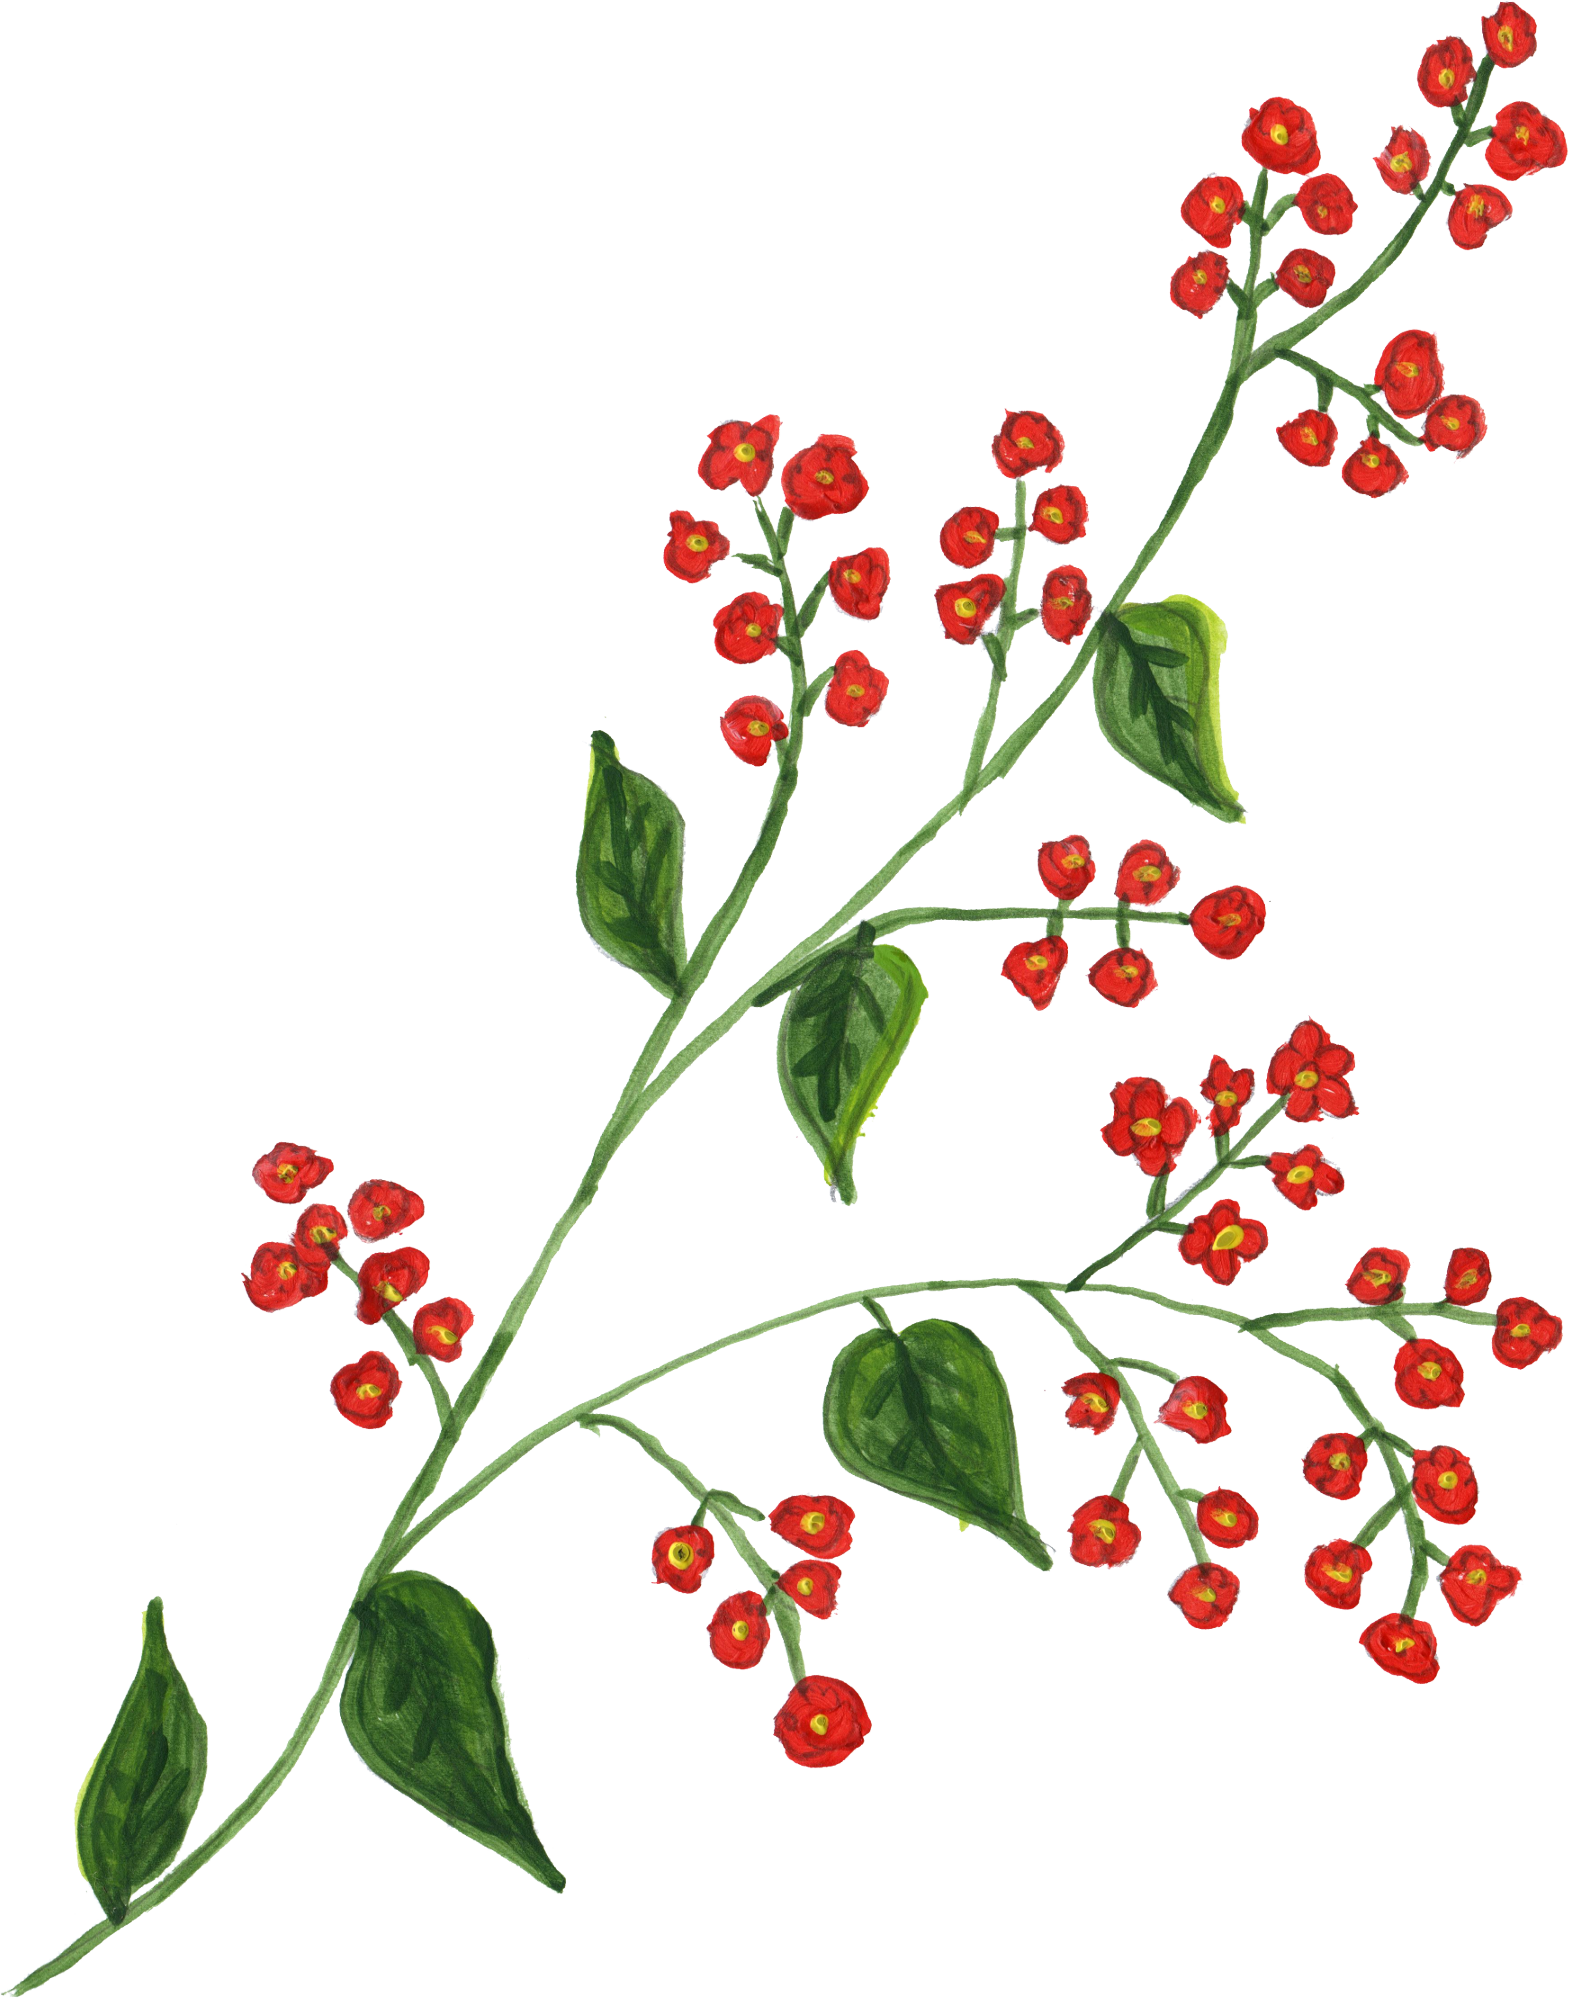 A Red Flowers On A Branch